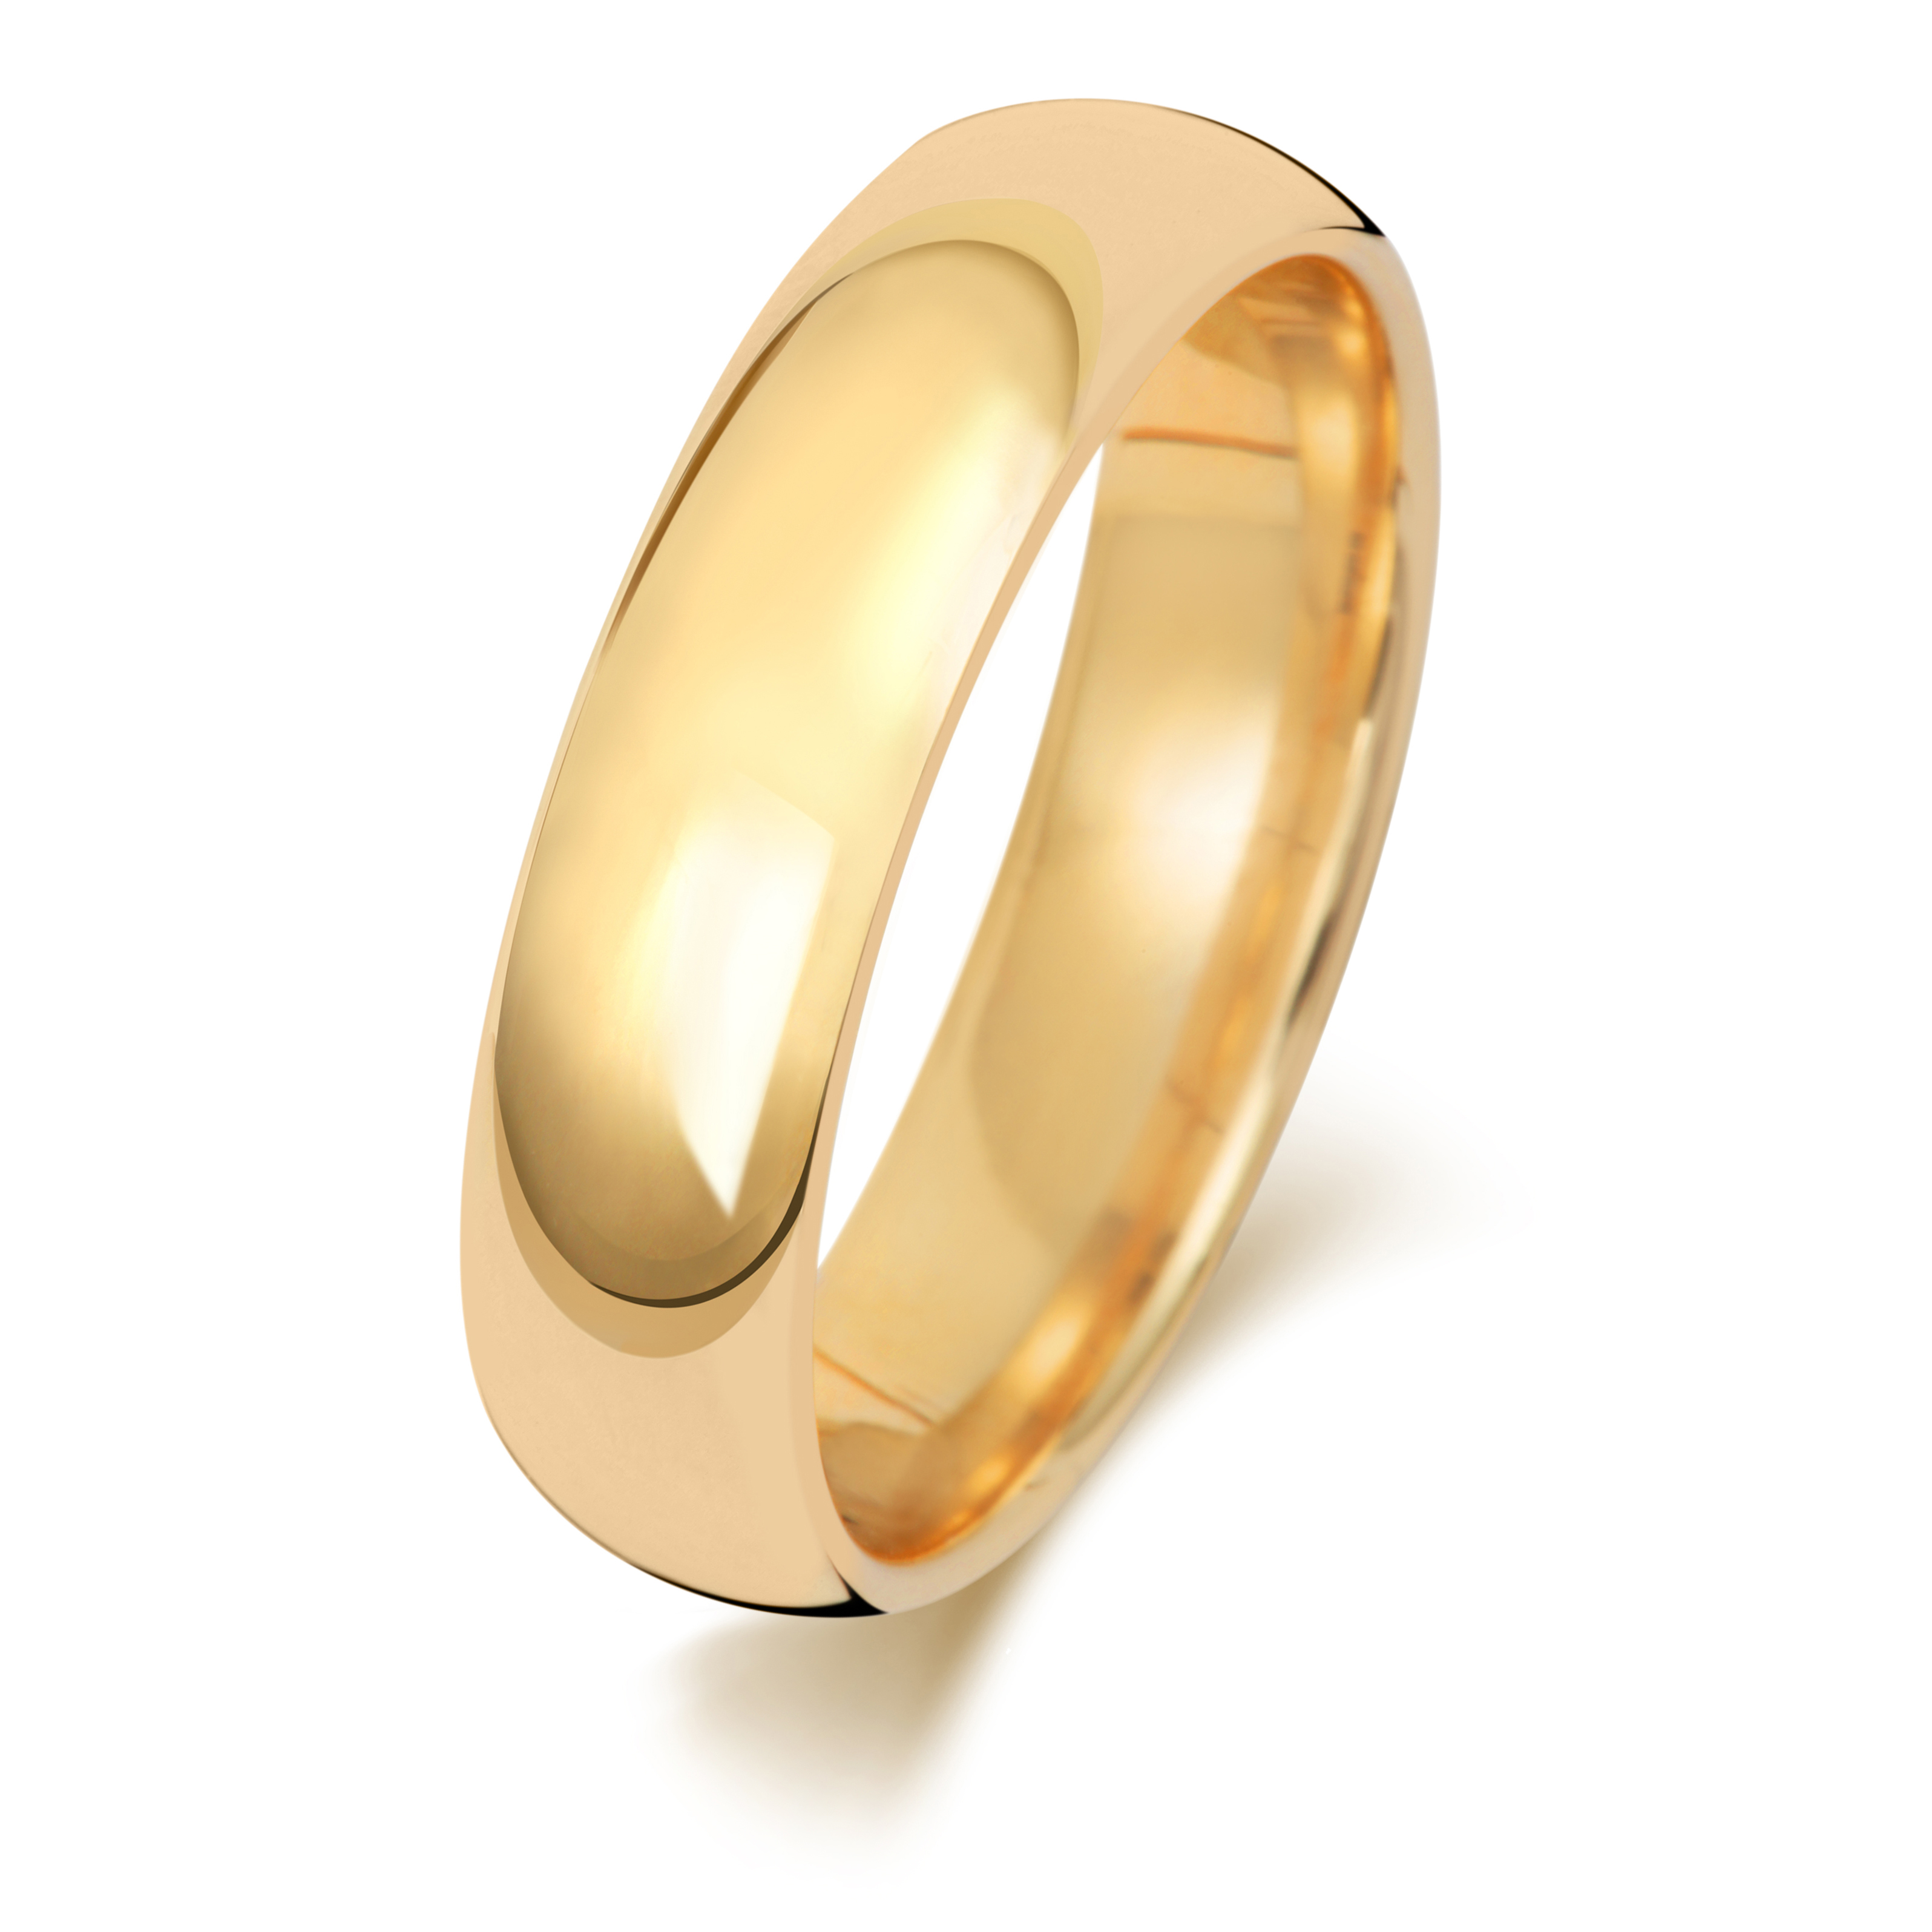 2.5 5 7mm Soft Court Wedding Band/Ring 3 6 Solid 18ct Carat Gold 2 4 